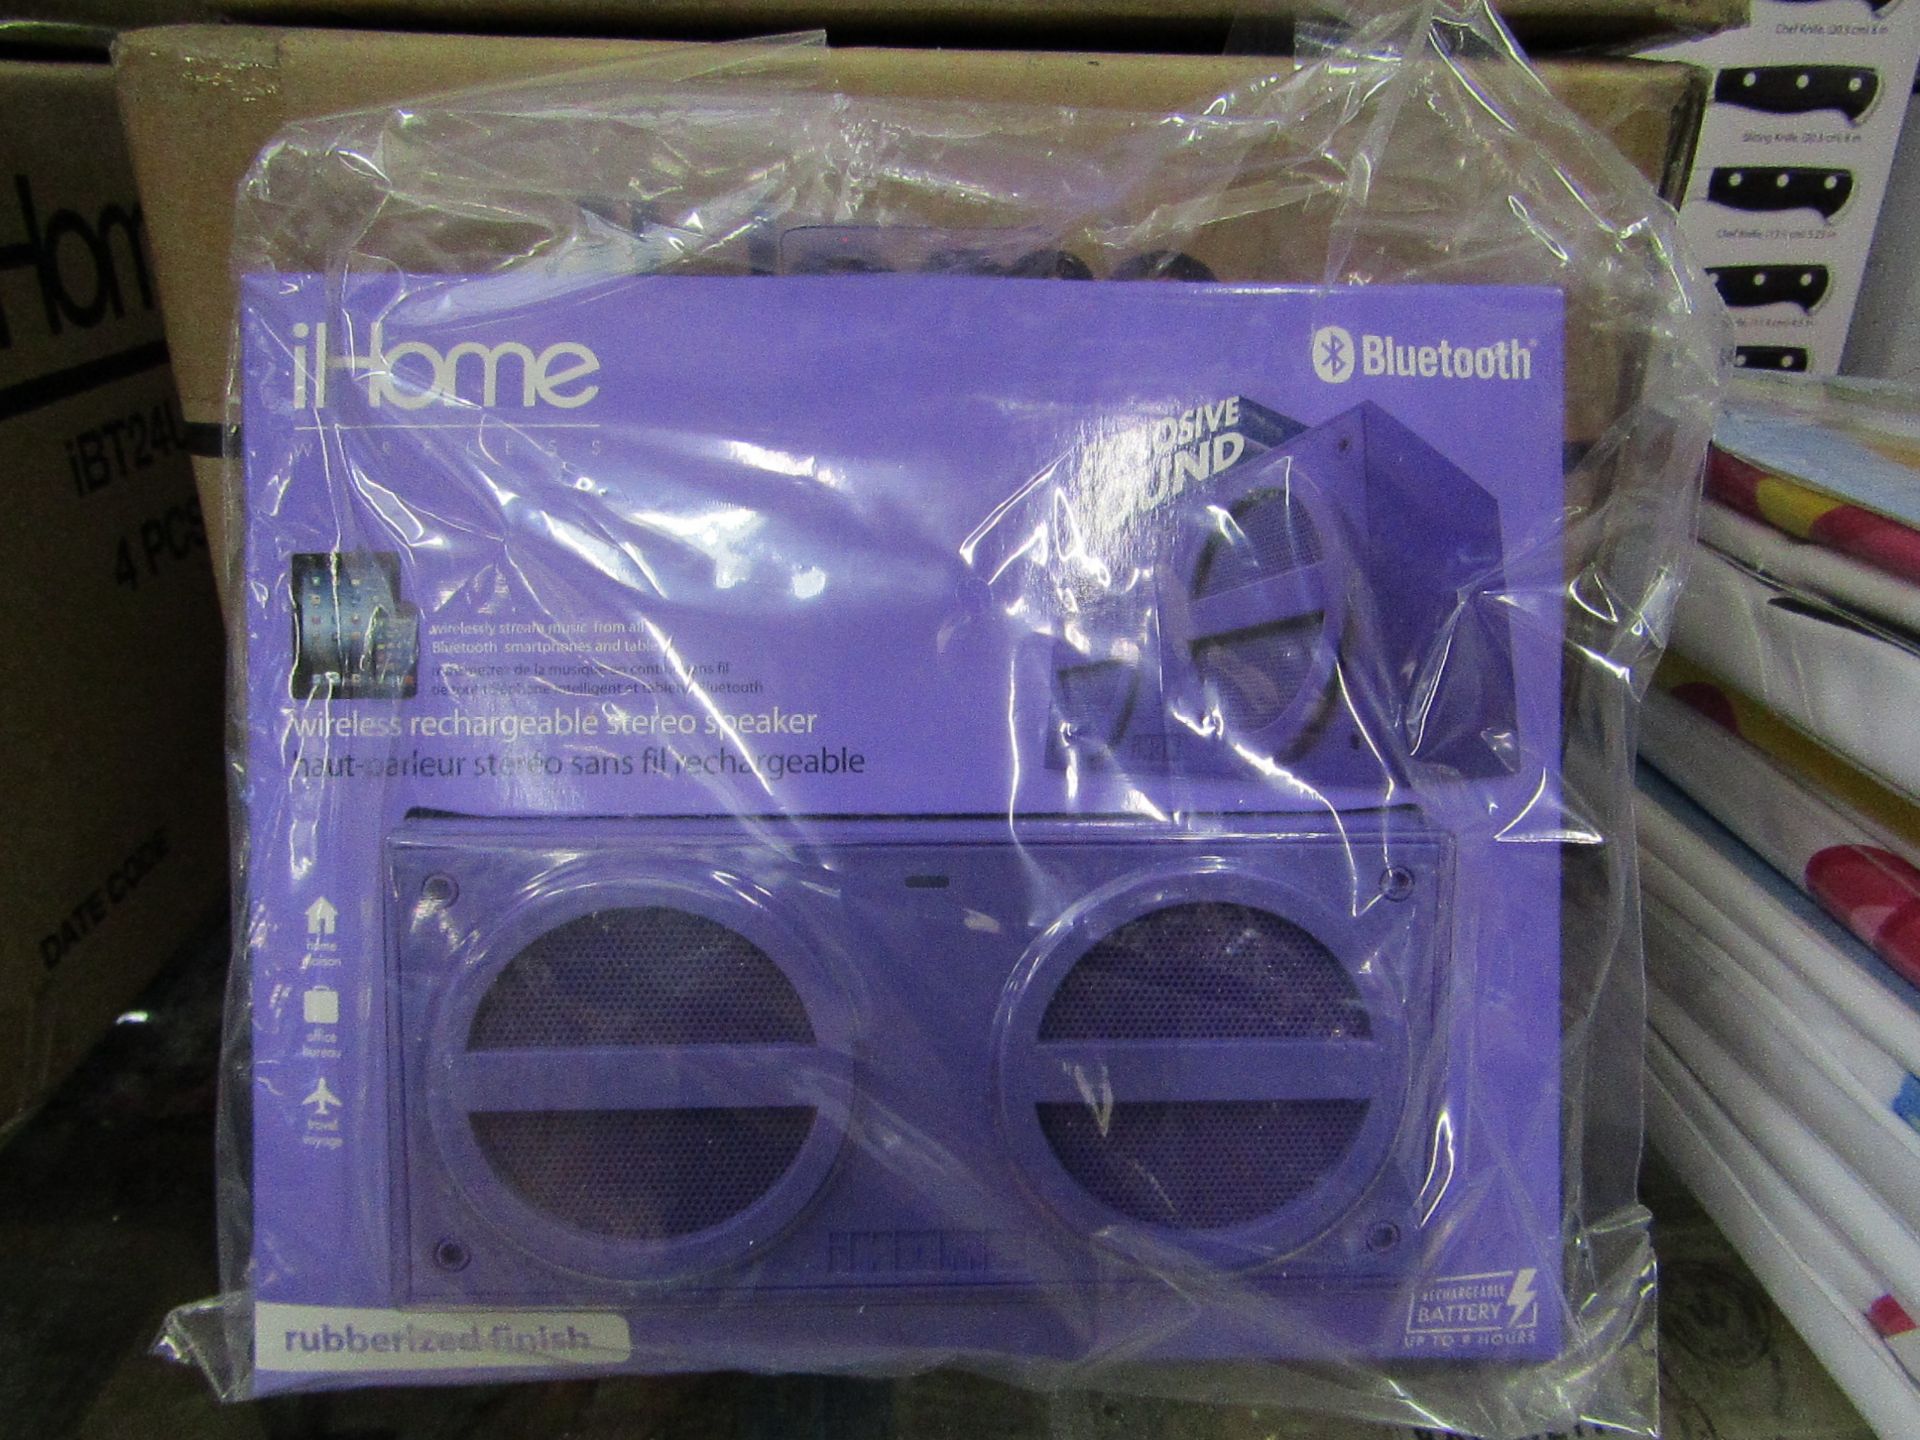 iHome - wireless rechargable bluetooth speaker - New & Packaged.